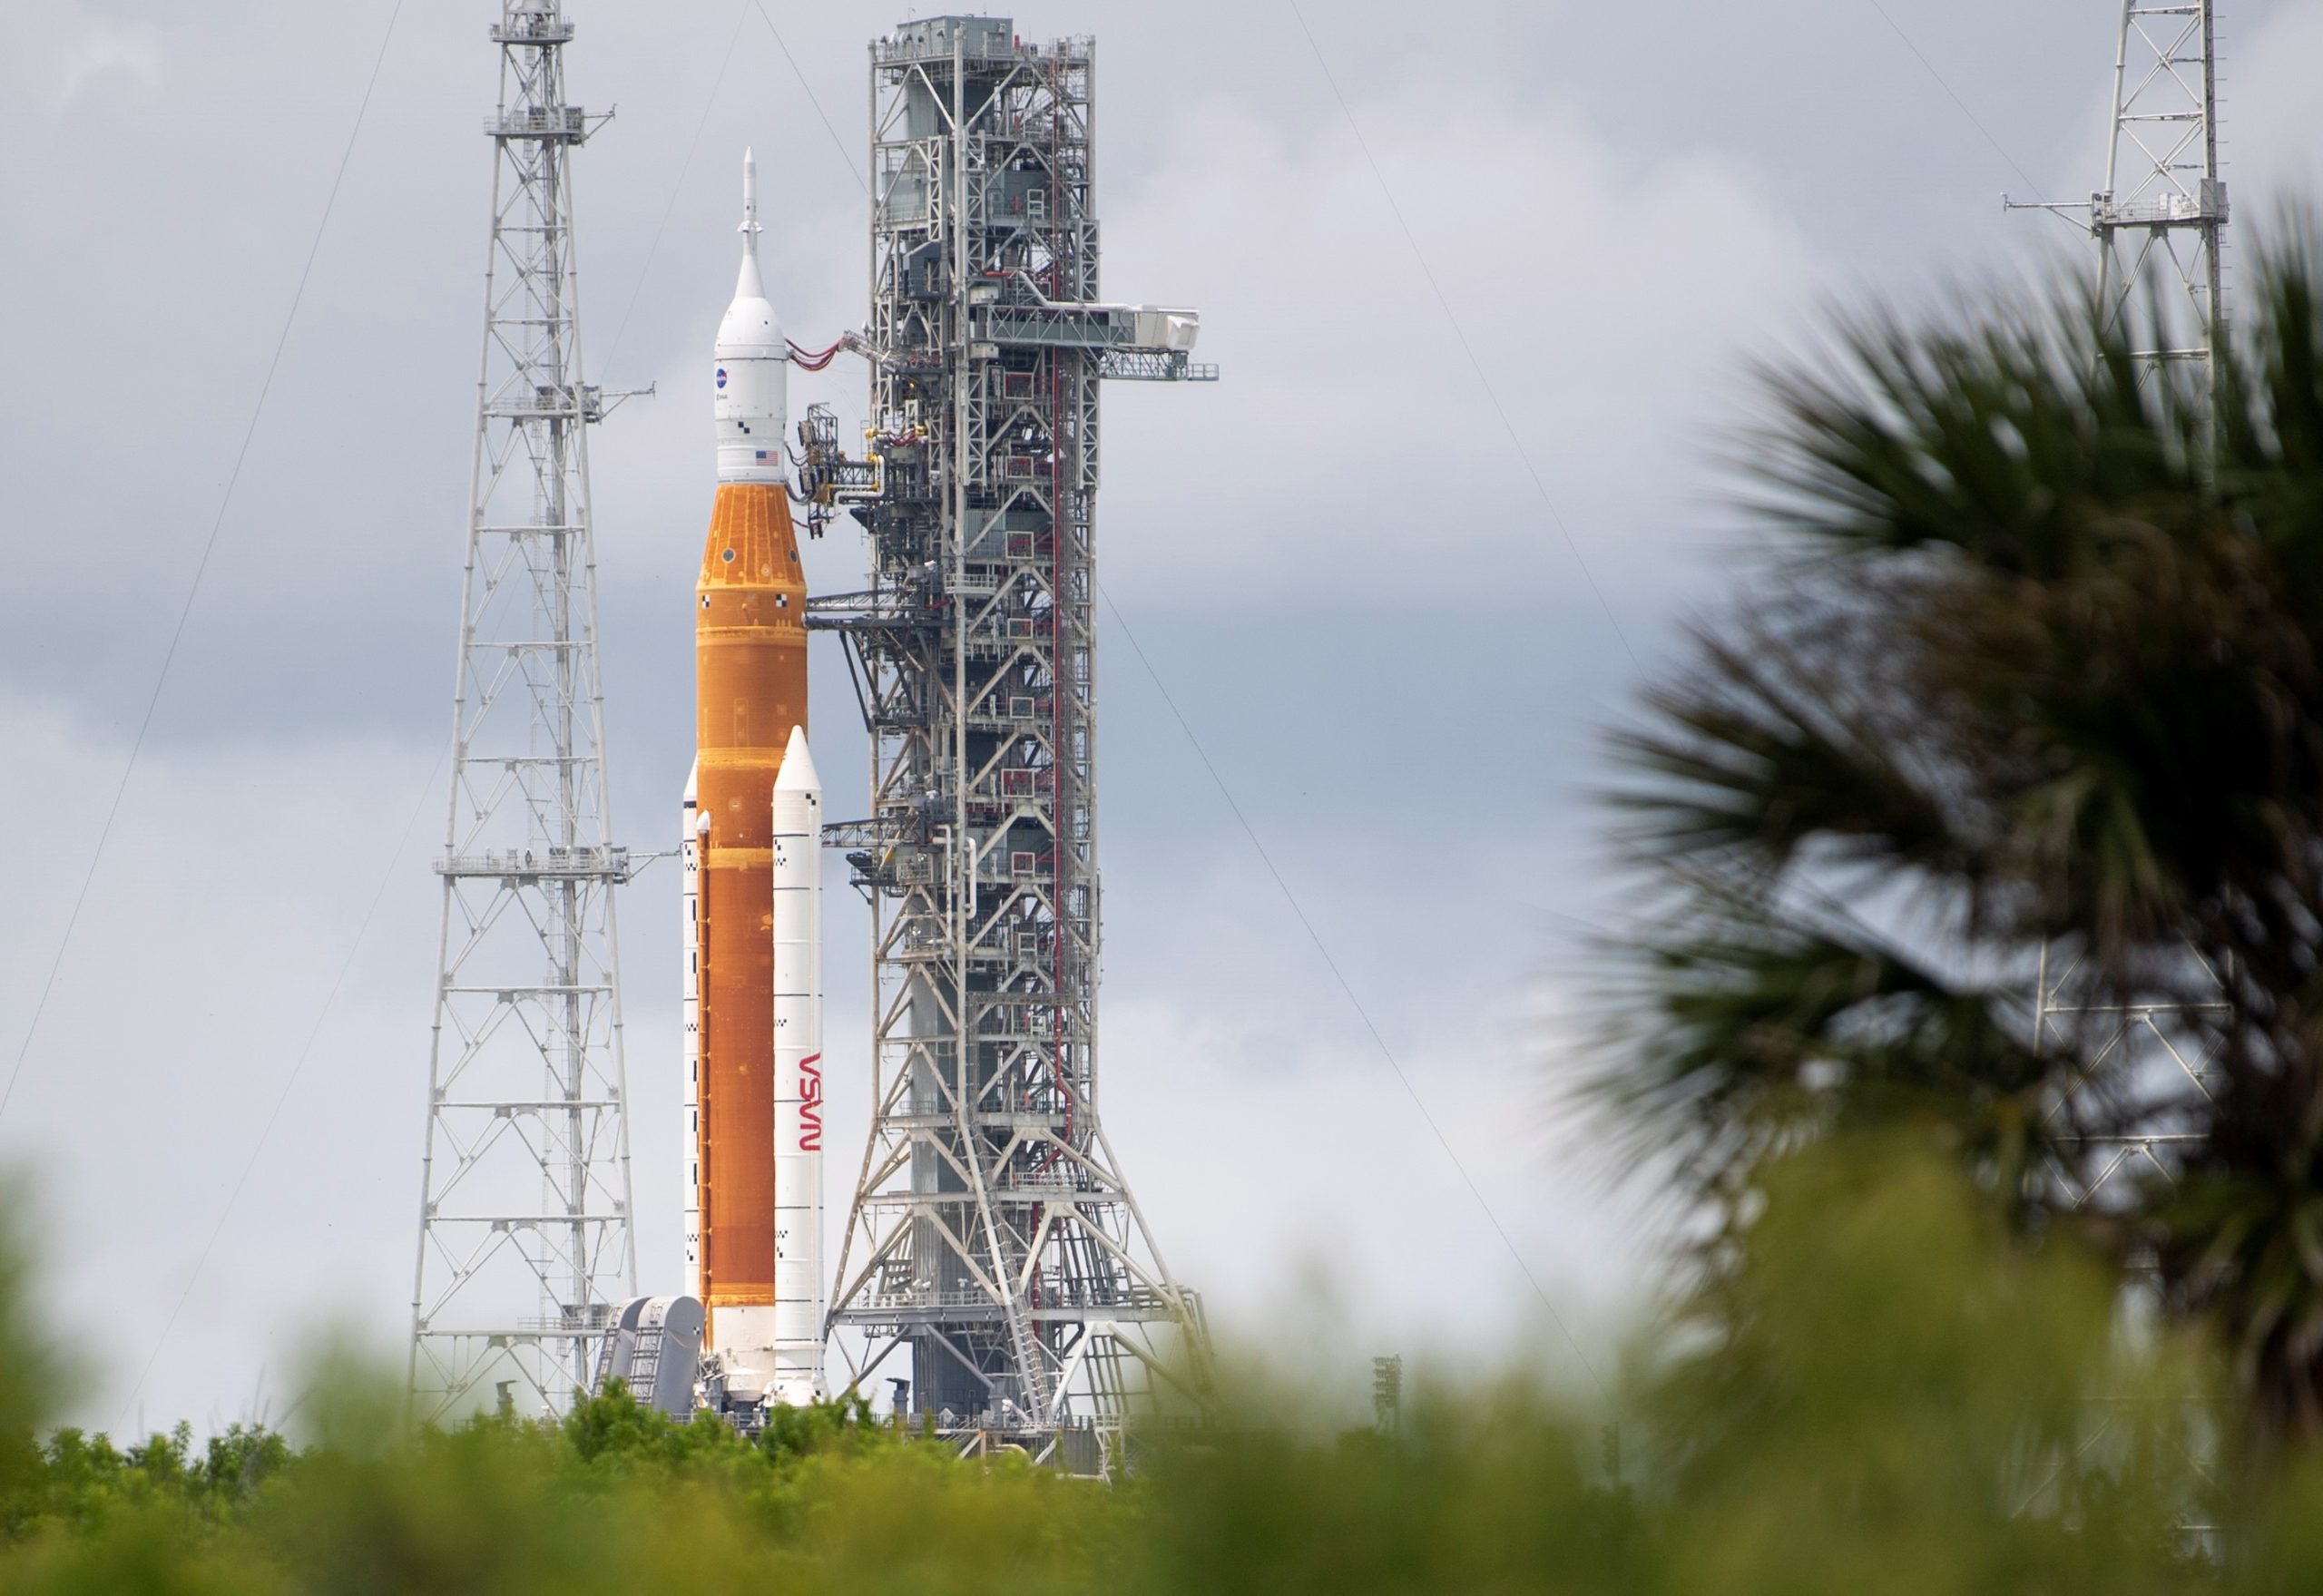 epa10144560 A handout picture made available by the National Aeronautics and Space Administration (NASA) shows NASA’s Space Launch System (SLS) rocket with the Orion spacecraft aboard seen atop a mobile launcher at Launch Pad 39B as preparations for launch continue, at NASA’s Kennedy Space Center in Merrit Island, Florida, USA, 29 August 2022. NASA’s Artemis I flight test is the first integrated test of the agency’s deep space exploration systems: the Orion spacecraft, SLS rocket, and supporting ground systems. Launch of the uncrewed flight test is targeted for no earlier than 29 August at 8:33 a.m. ET.  EPA/Joel Kowsky / HANDOUT MANDATORY CREDIT: (NASA/Joel Kowsky) HANDOUT EDITORIAL USE ONLY/NO SALES